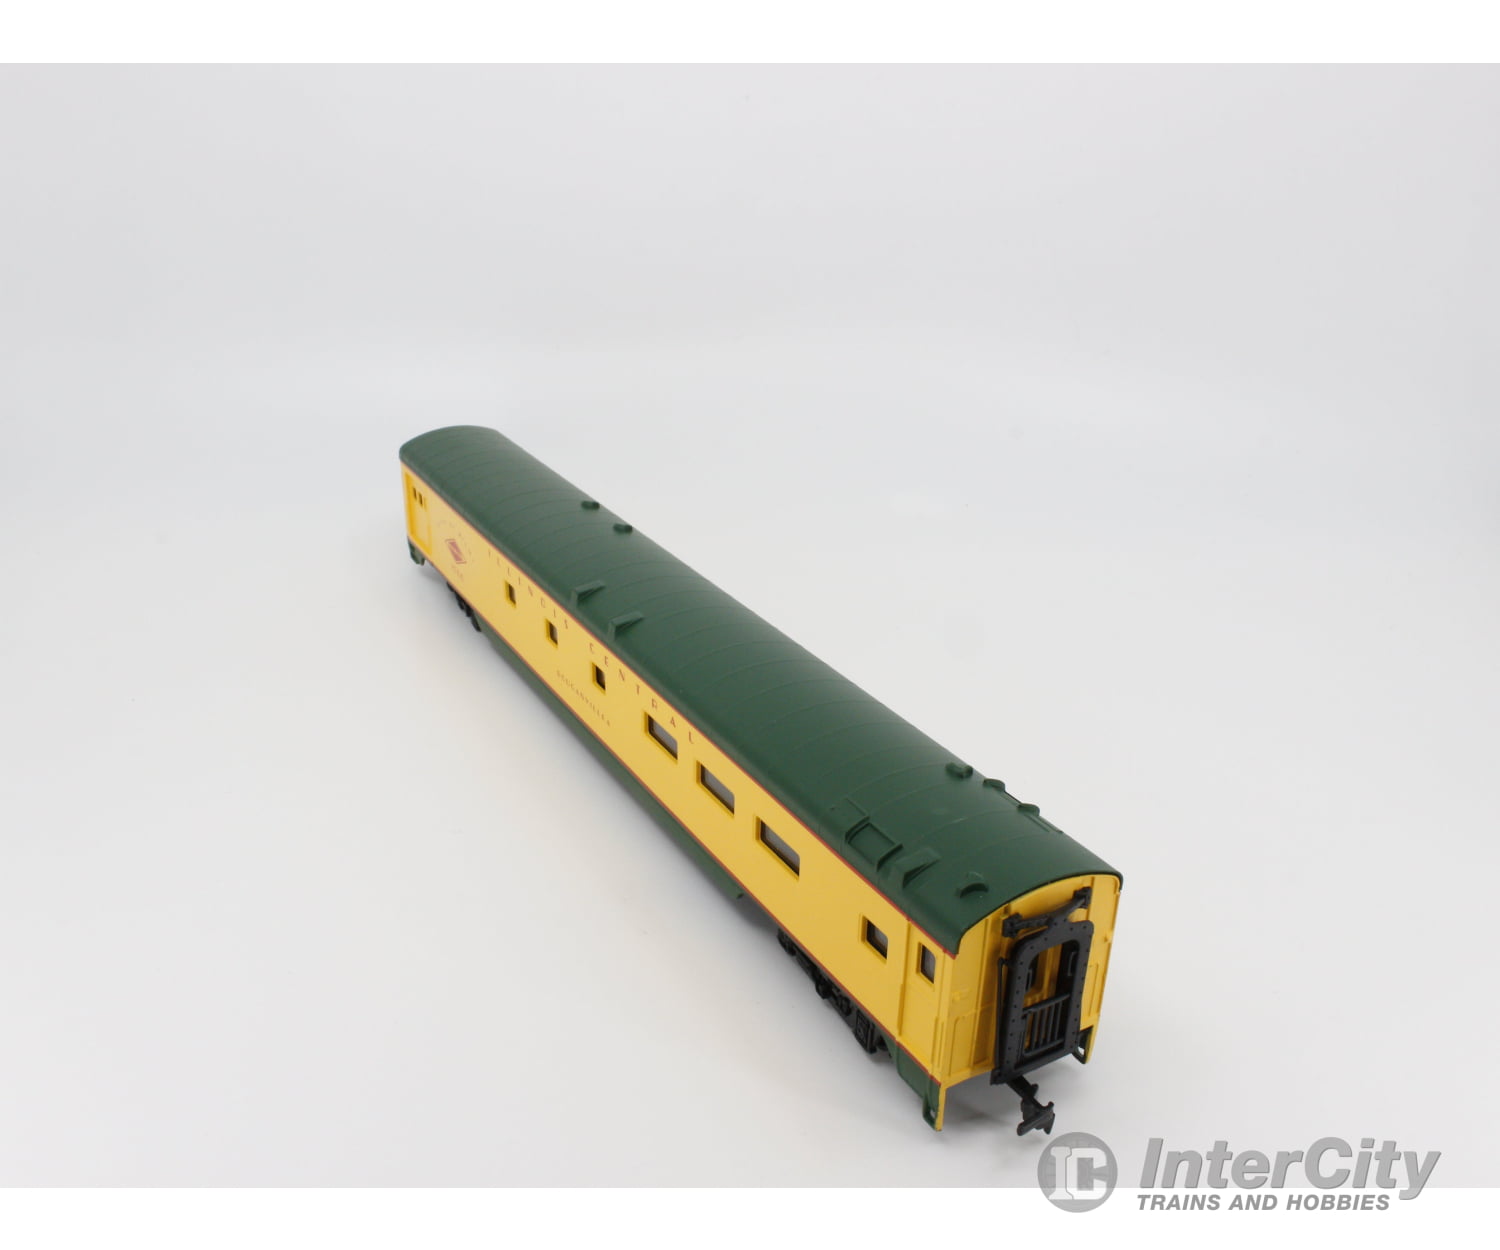 International Hobby Corp. 48334 Ho Combine Passenger Car Smooth Side P.s. Illinois Central (Ic)